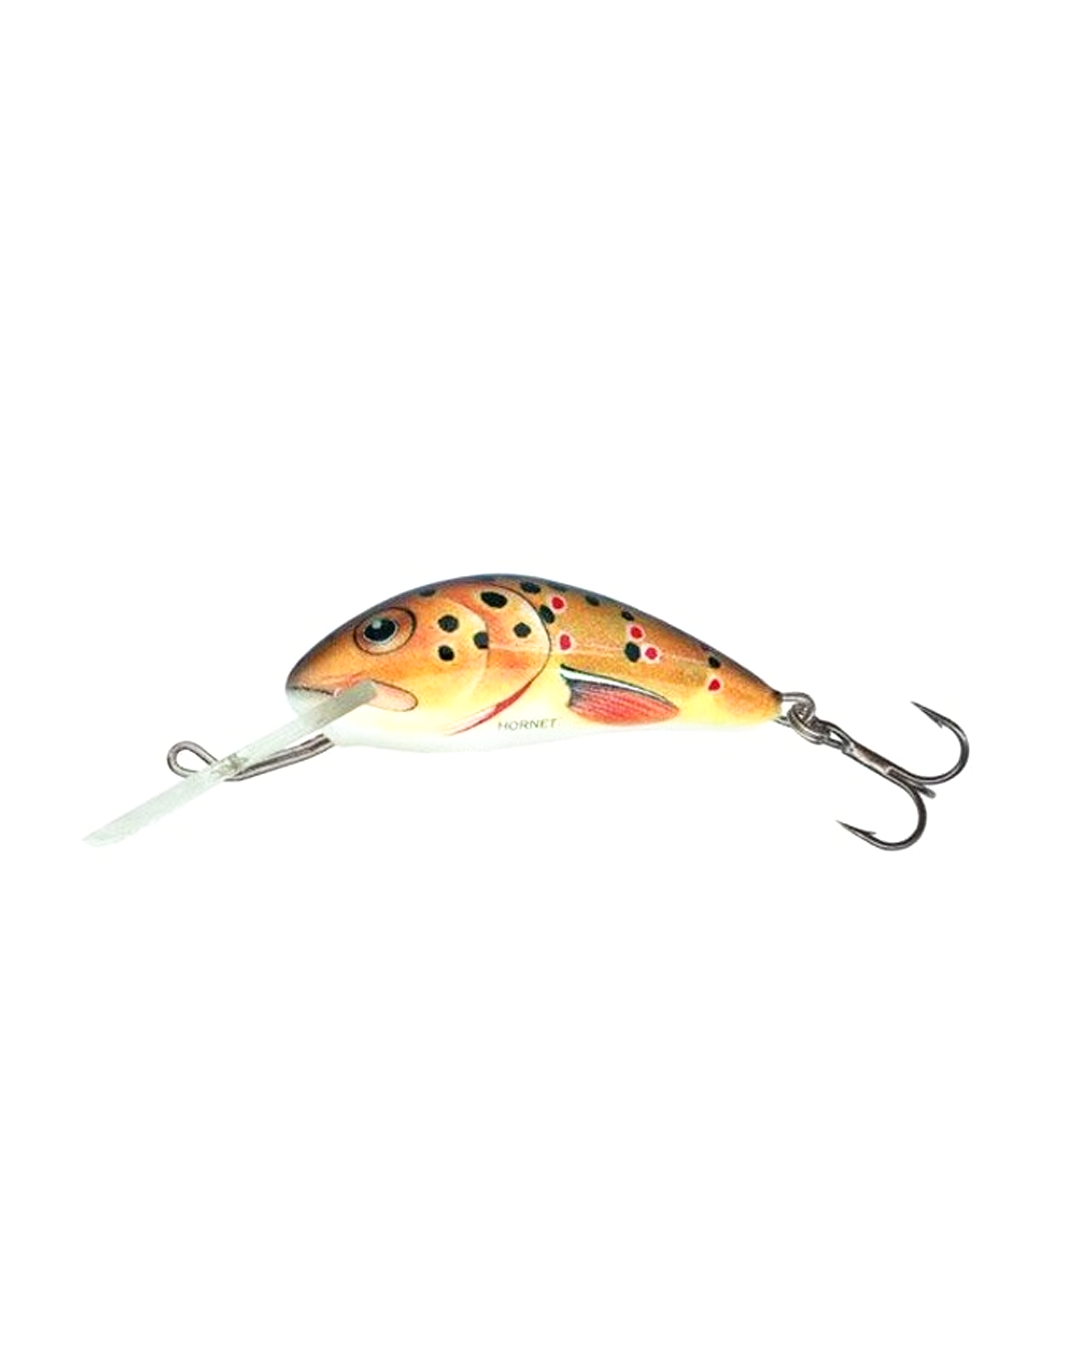 Salmo Hornet 3 Trout- 35mm 2,6g Sinking – Pesca Mortal Conce